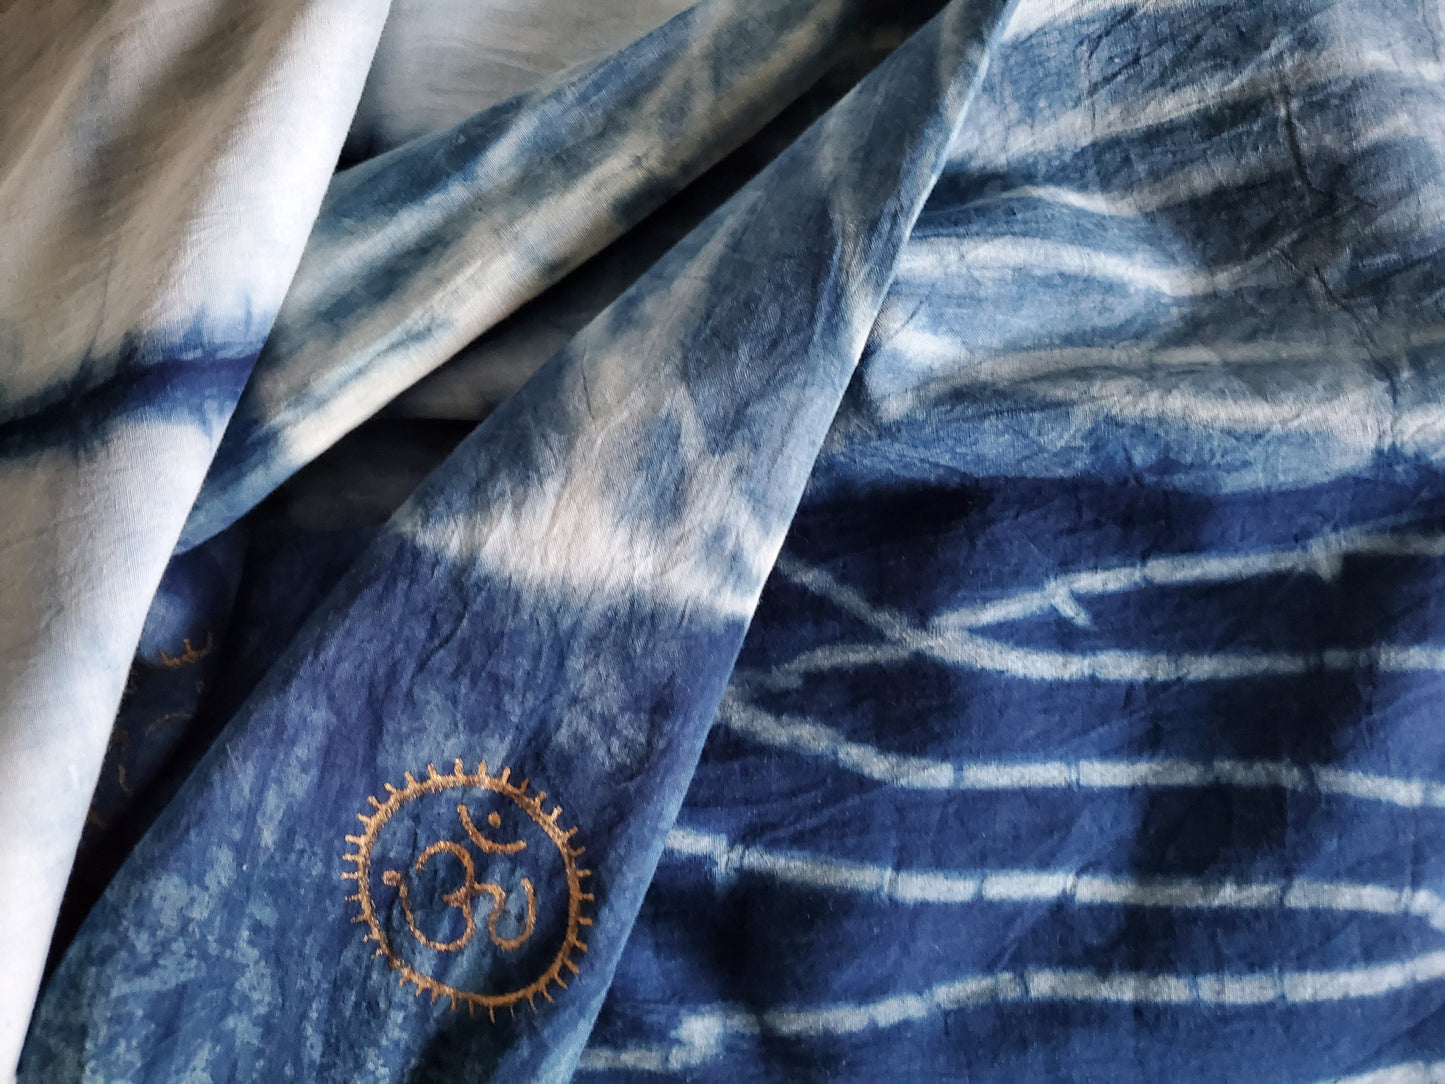 Indigo Dyed Hand Printed Cotton Fabric by OMSutra